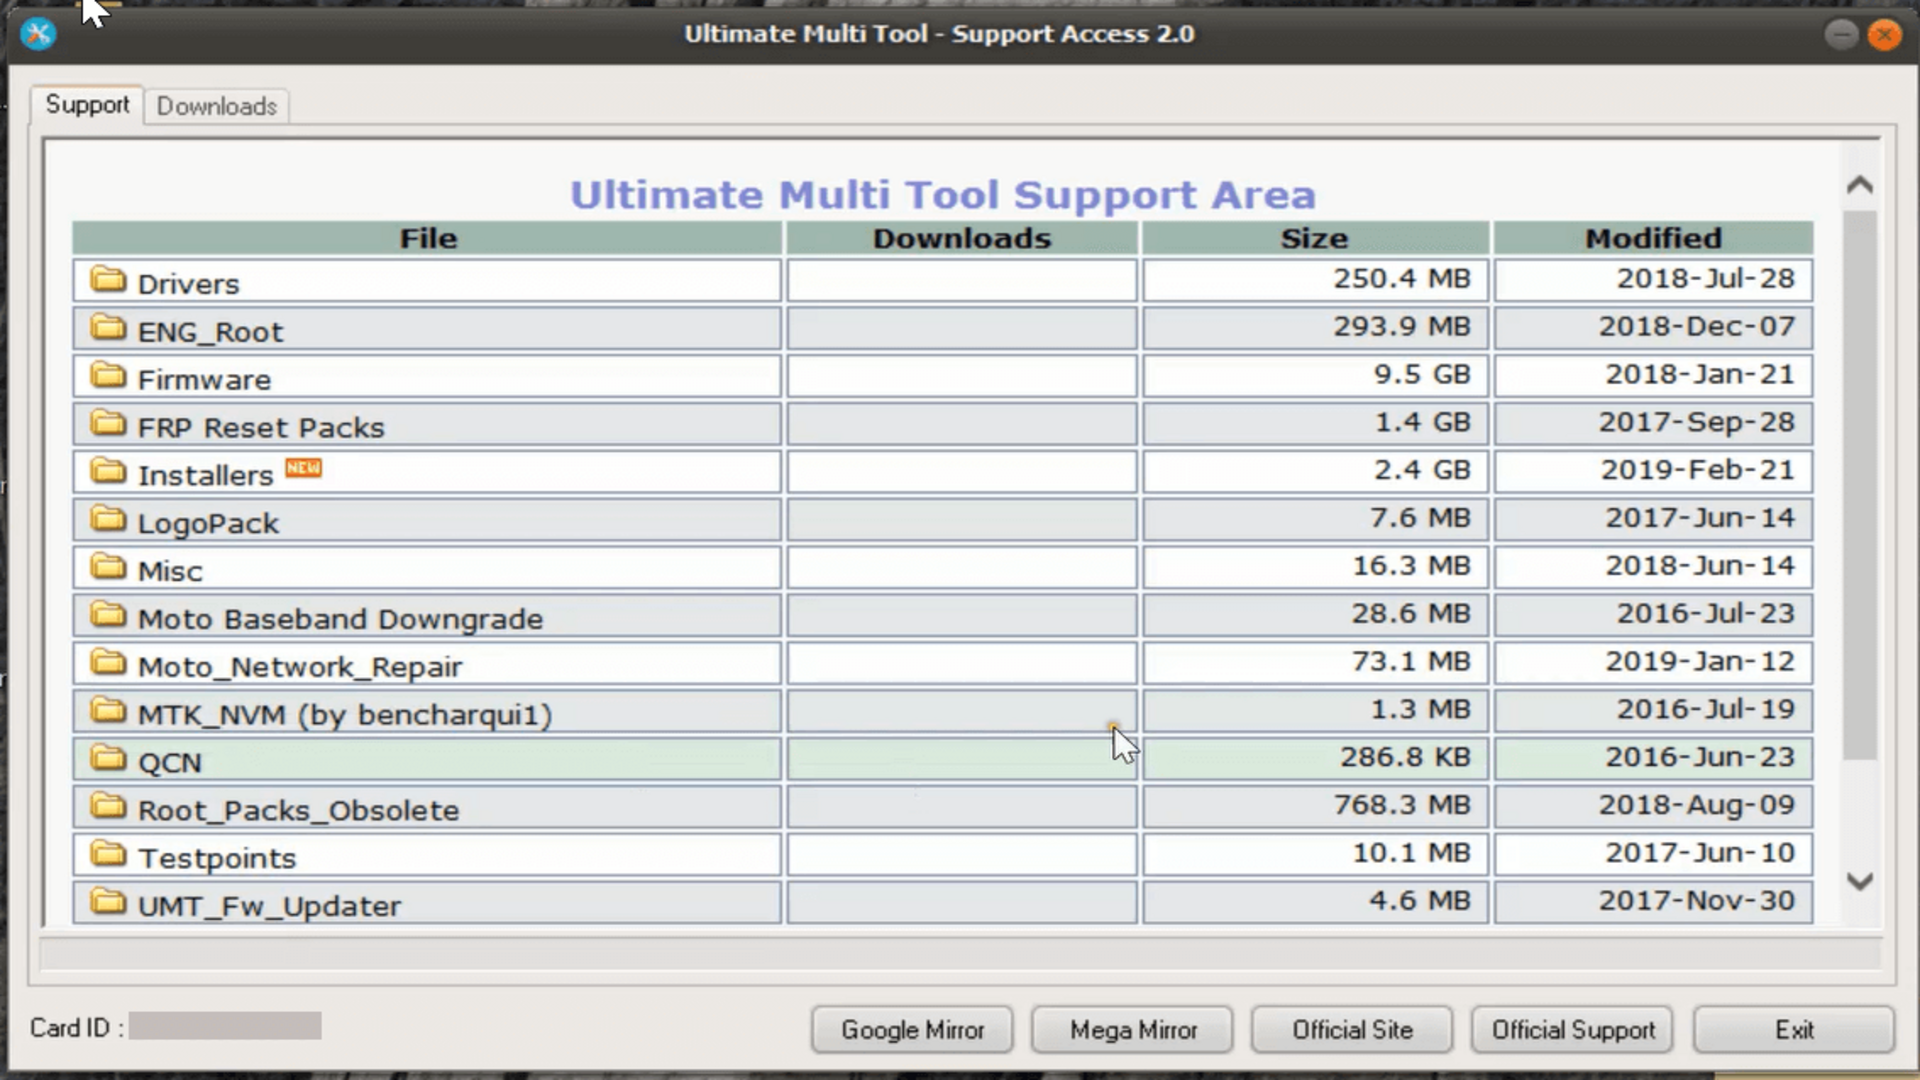 UMT Support Access download